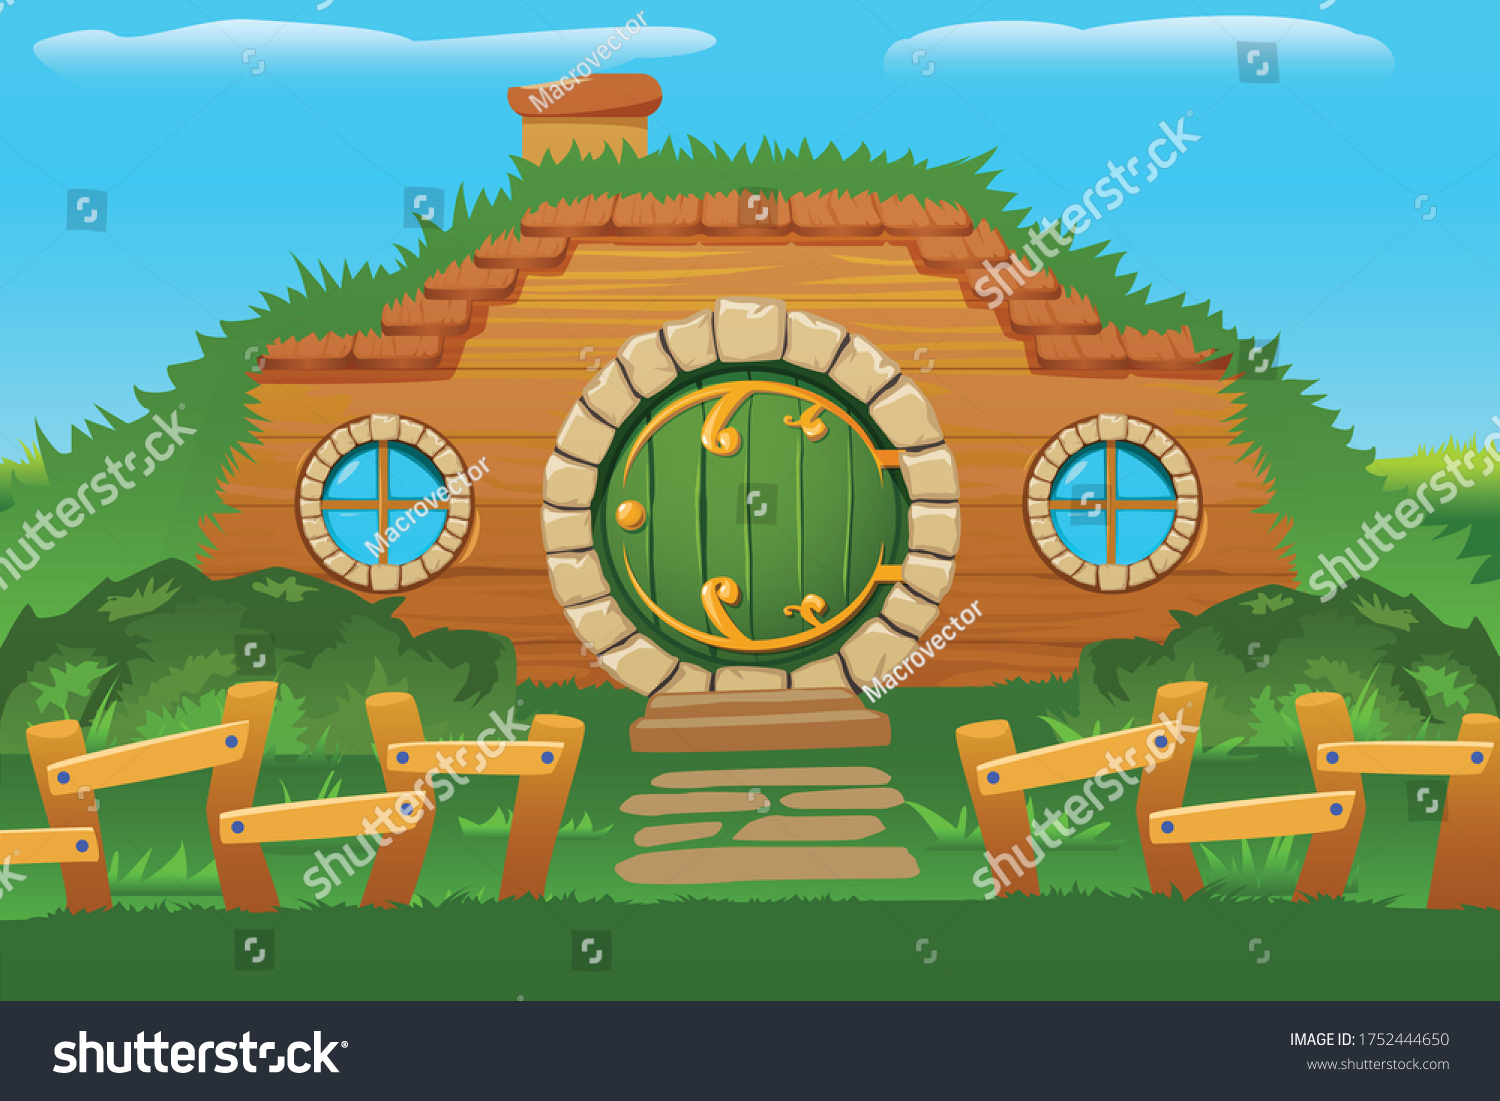 SVG of Cartoon doors composition with outside view of hobbit house built in hill side with round windows vector illustration svg